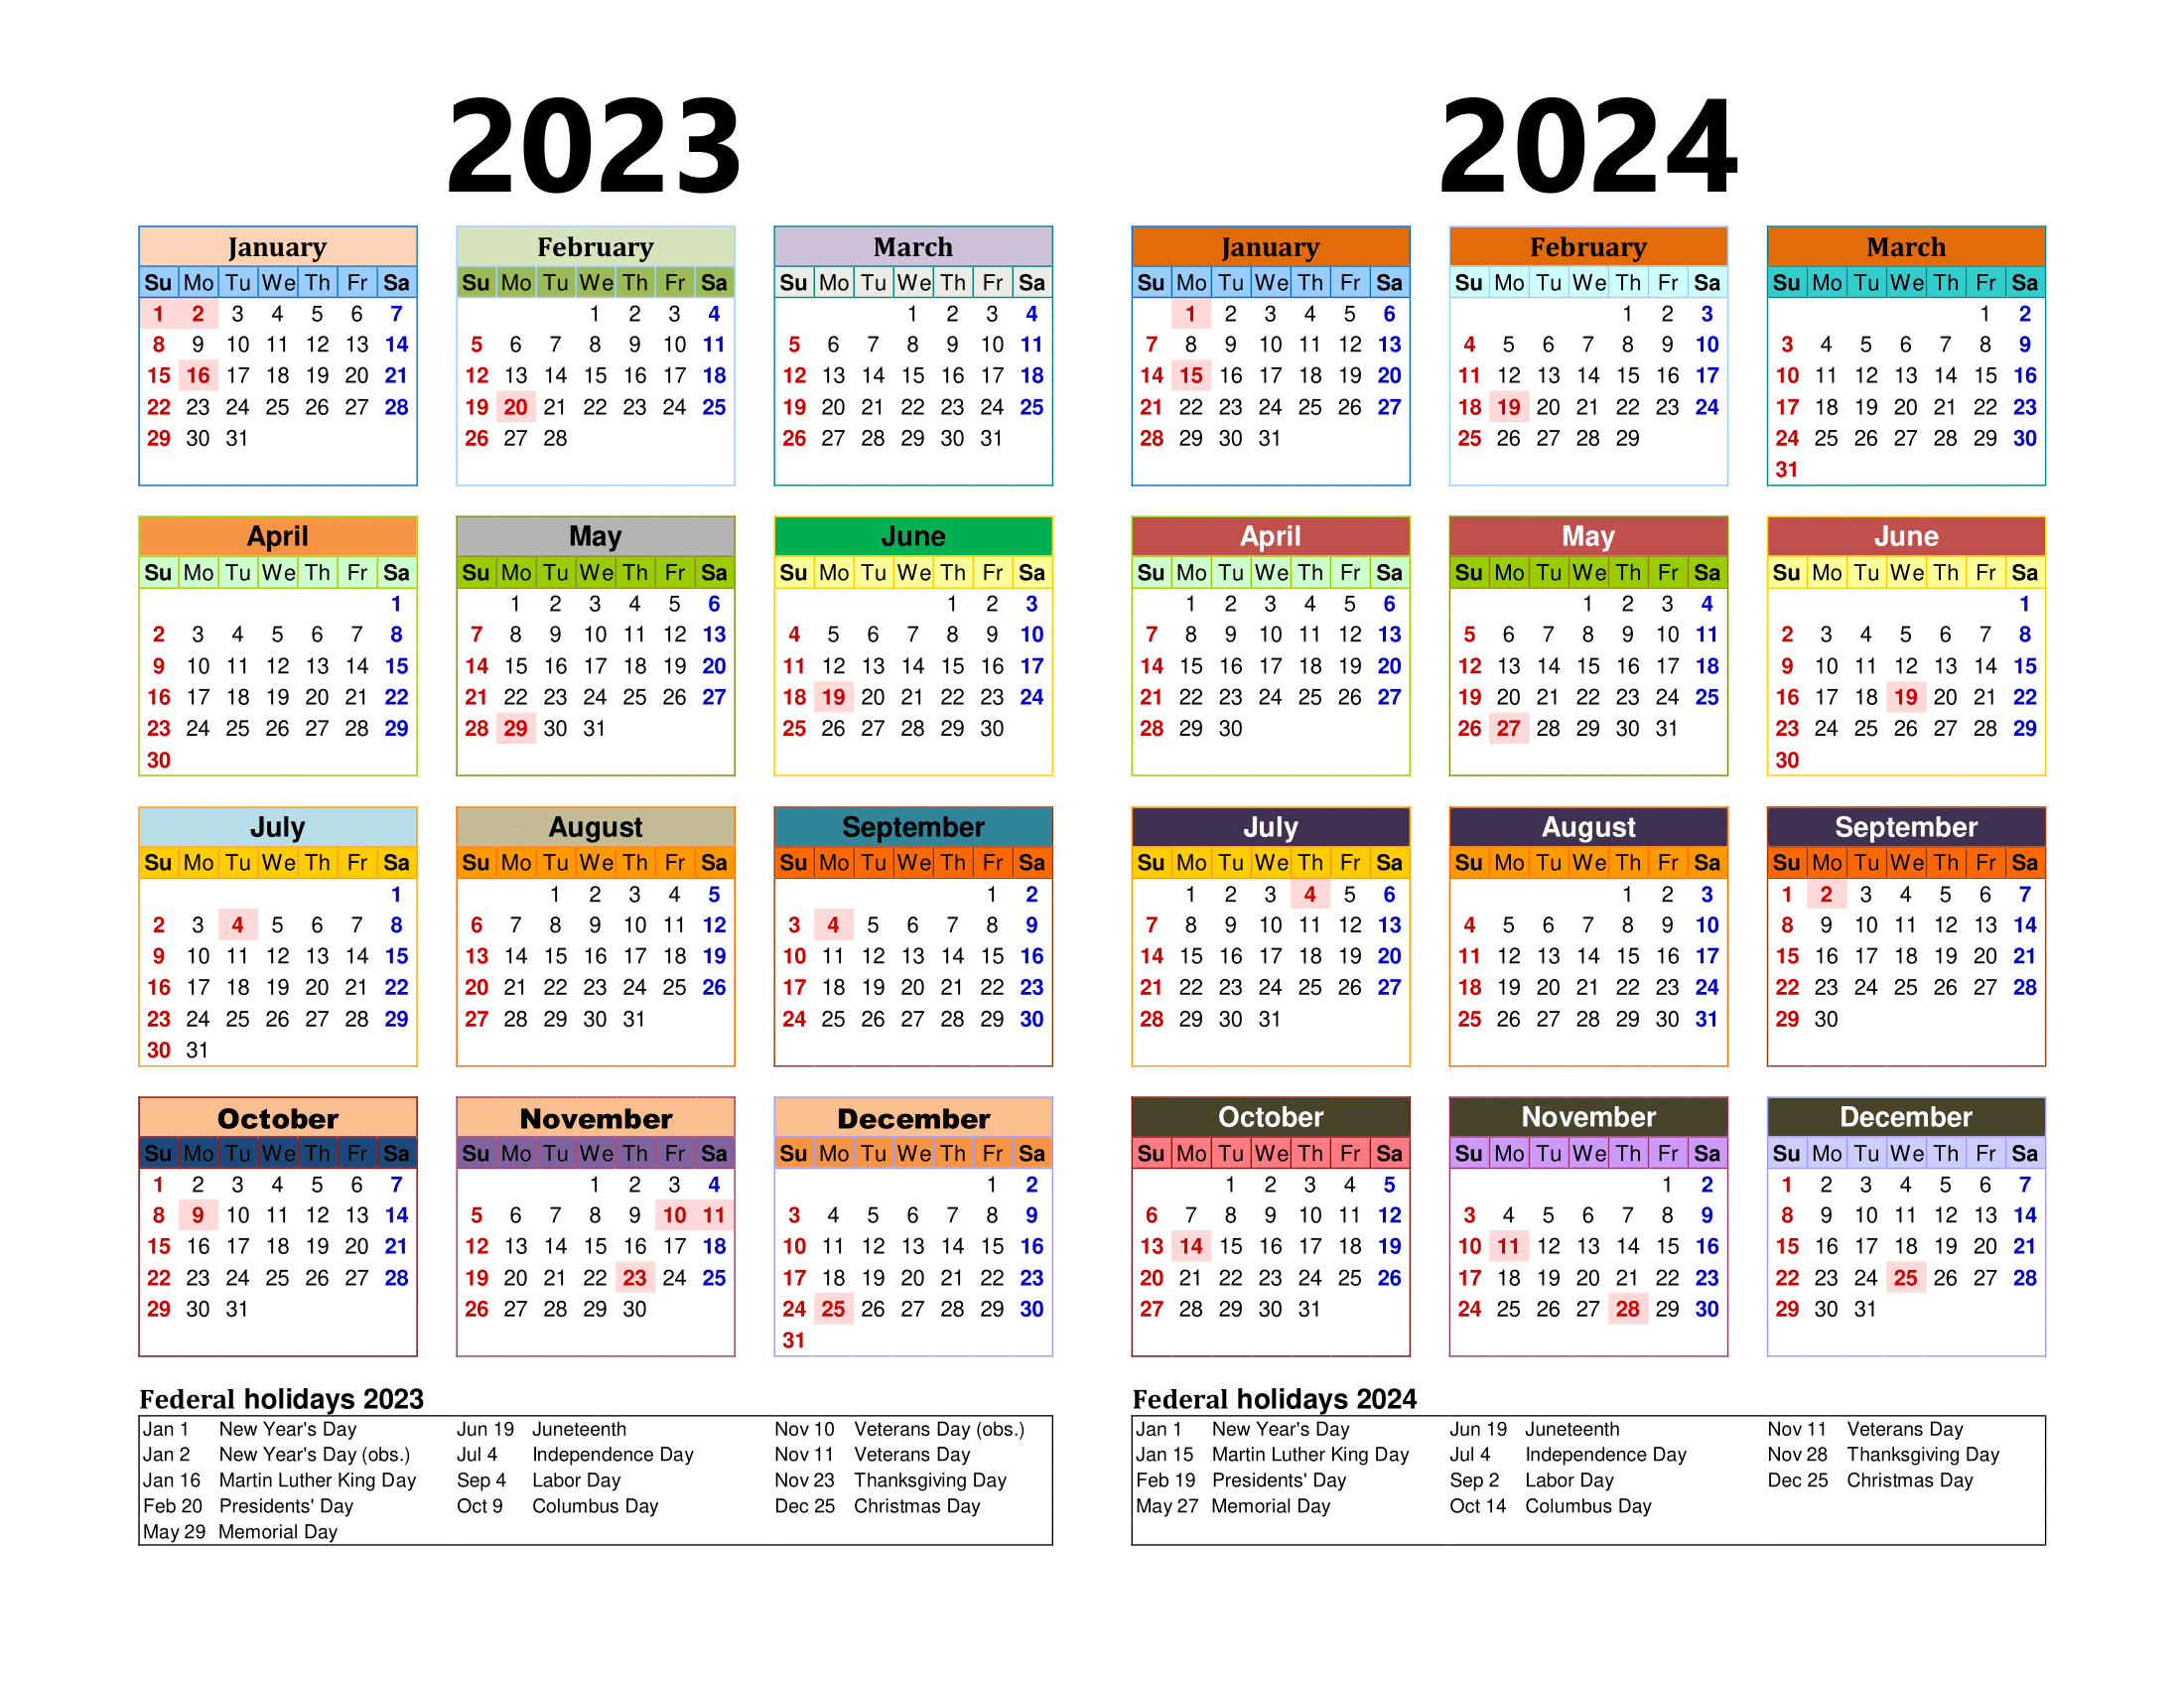 Free Printable Two Year Calendar Templates For 2023 And 2024 In Pdf for 2023-2024 Printable Calendar